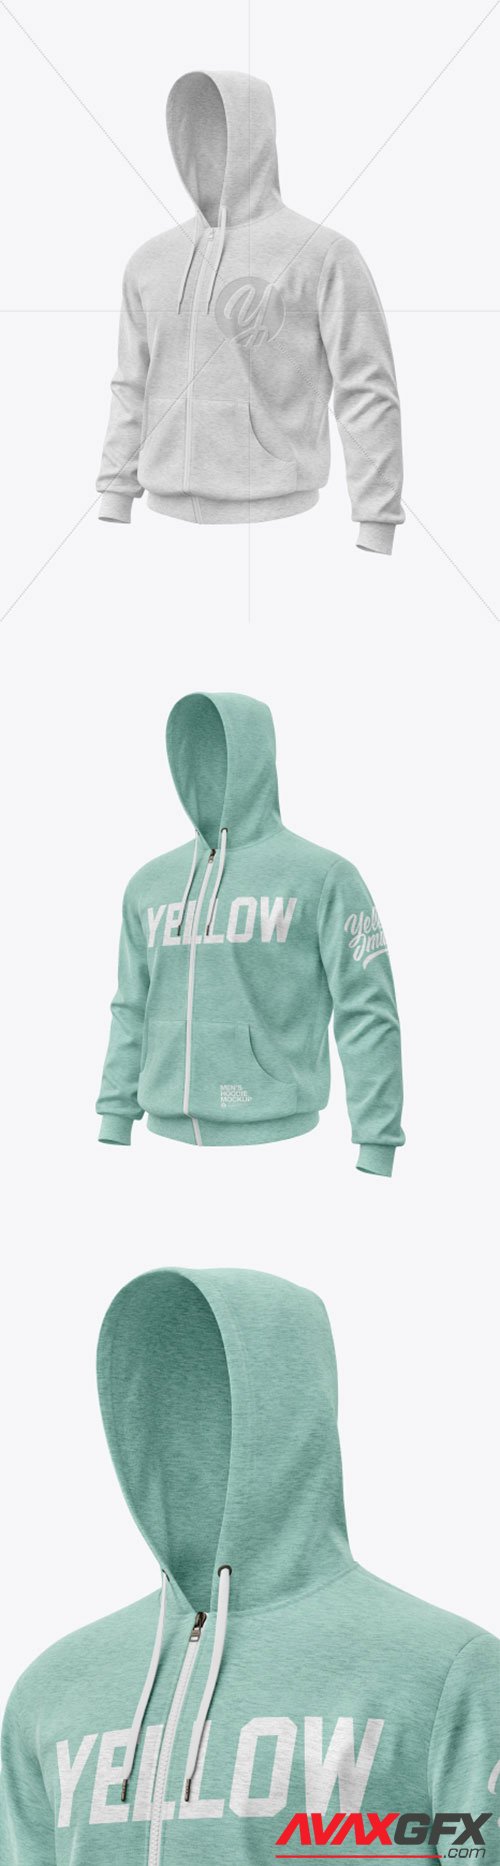 Melange Hoodie Mockup - Front View 47881 » AVAXGFX - All ...